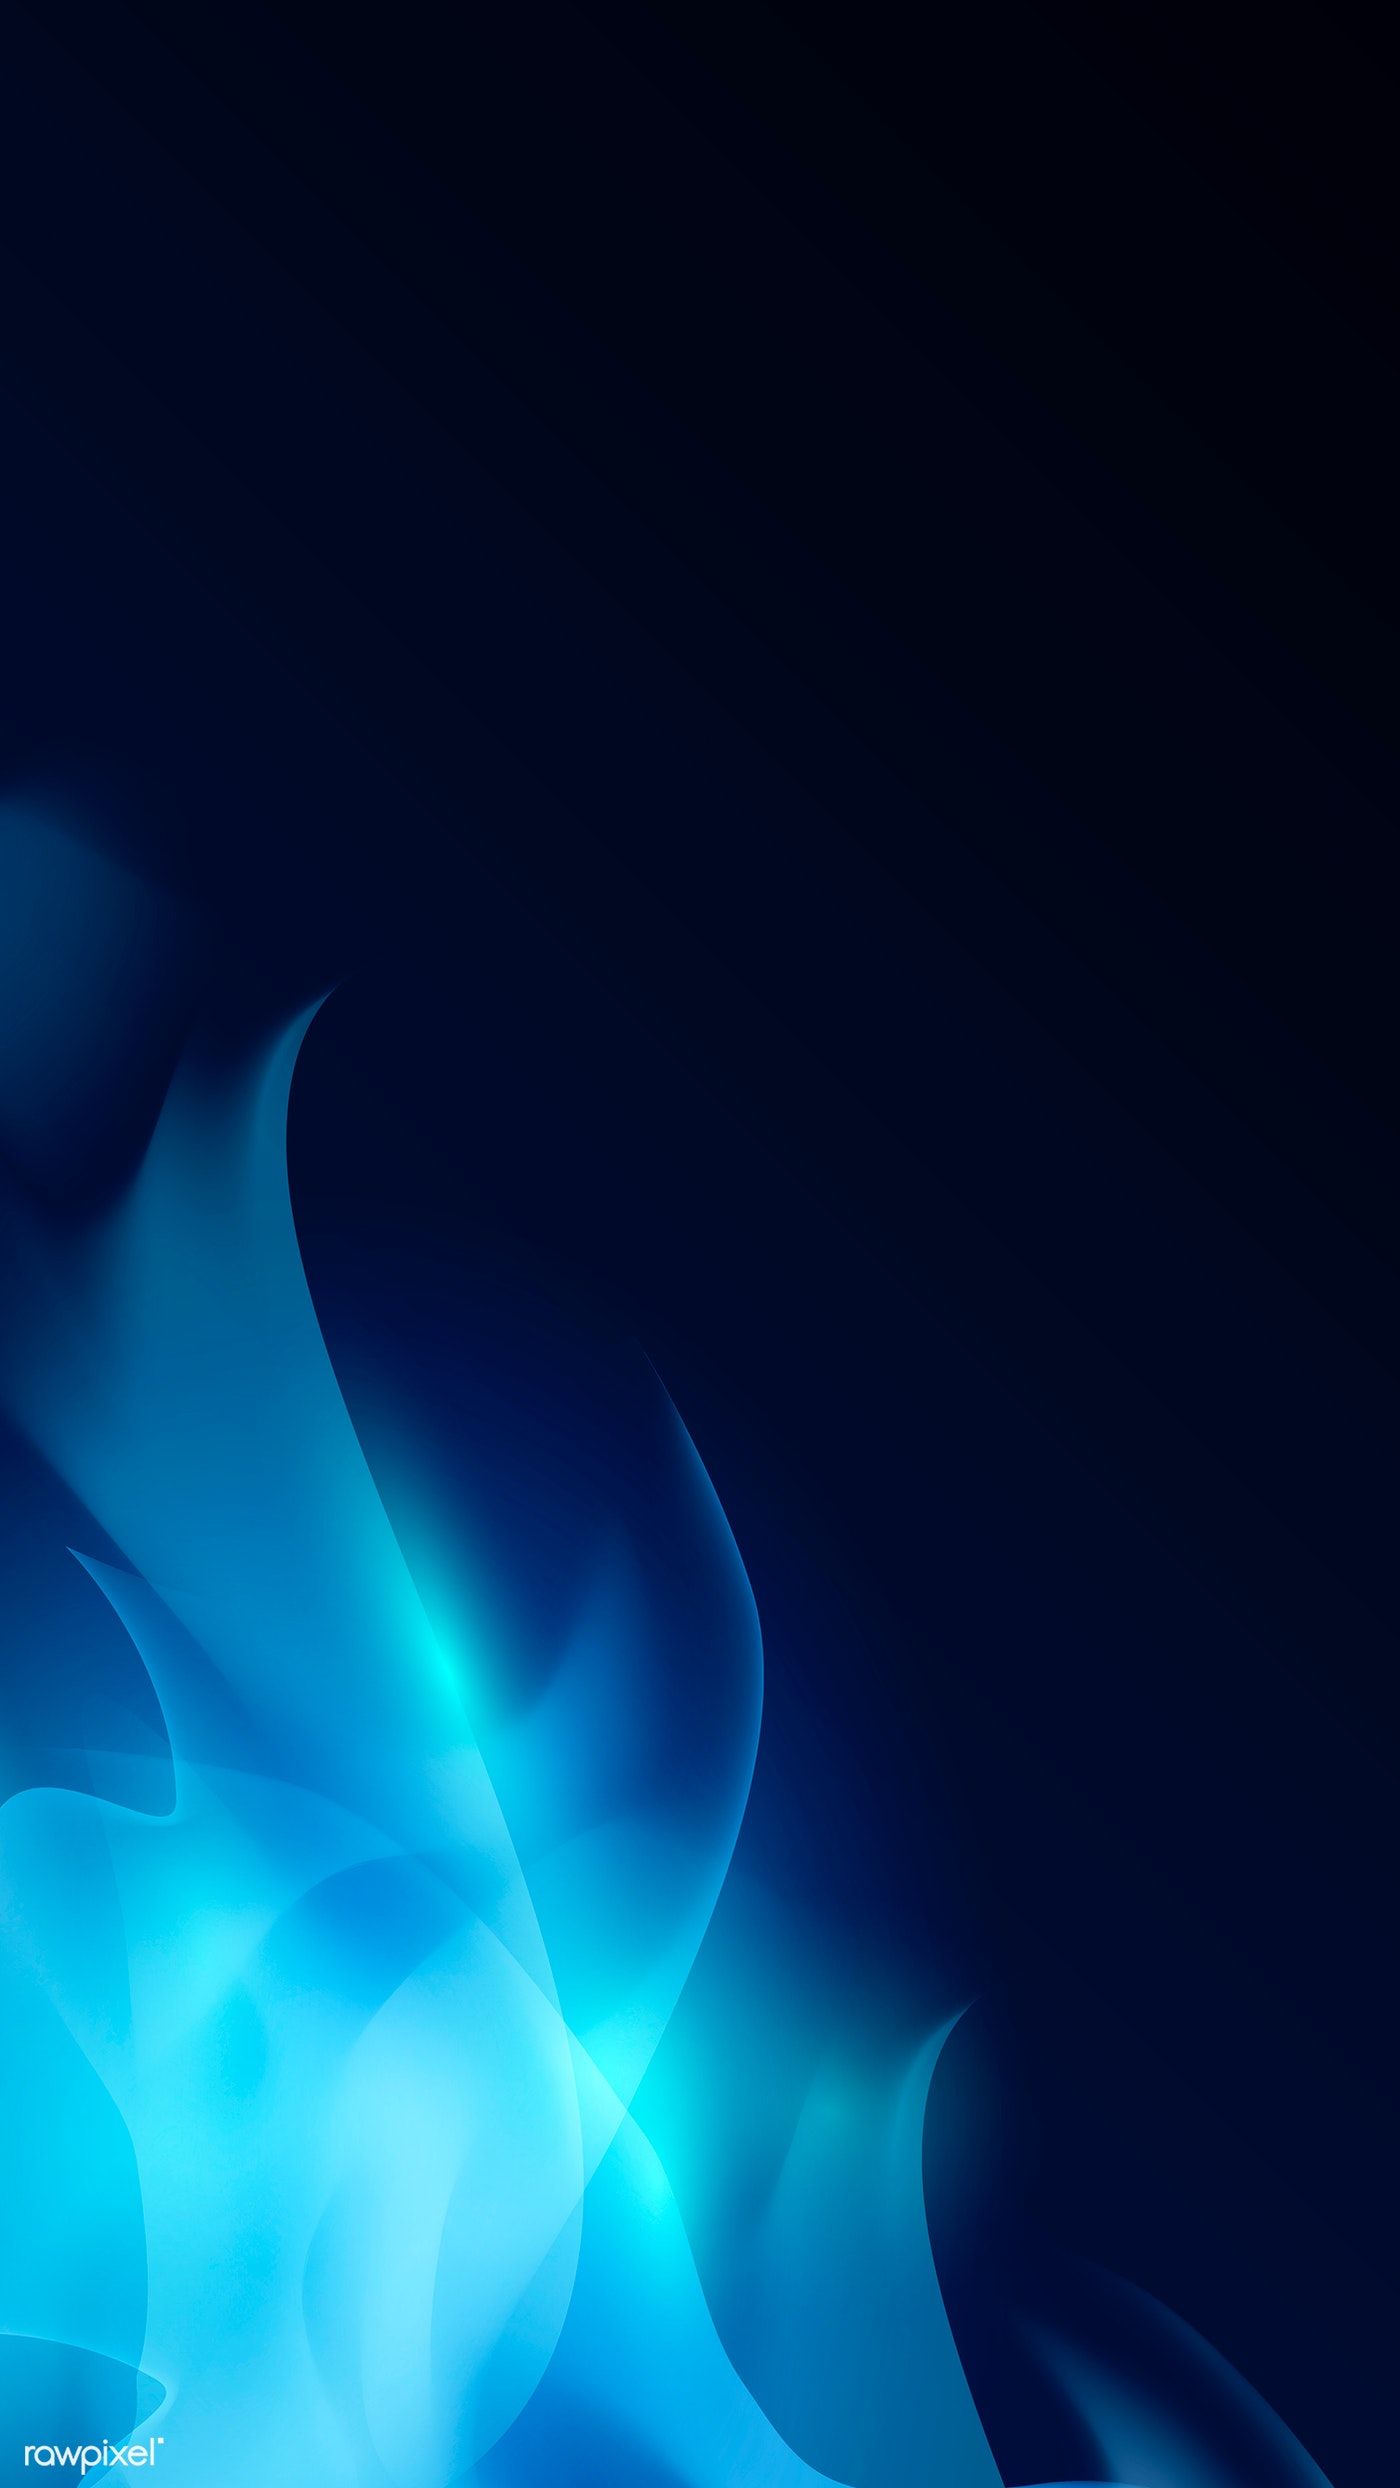 Blue Blazing Flame Abstract Background Vector Image By